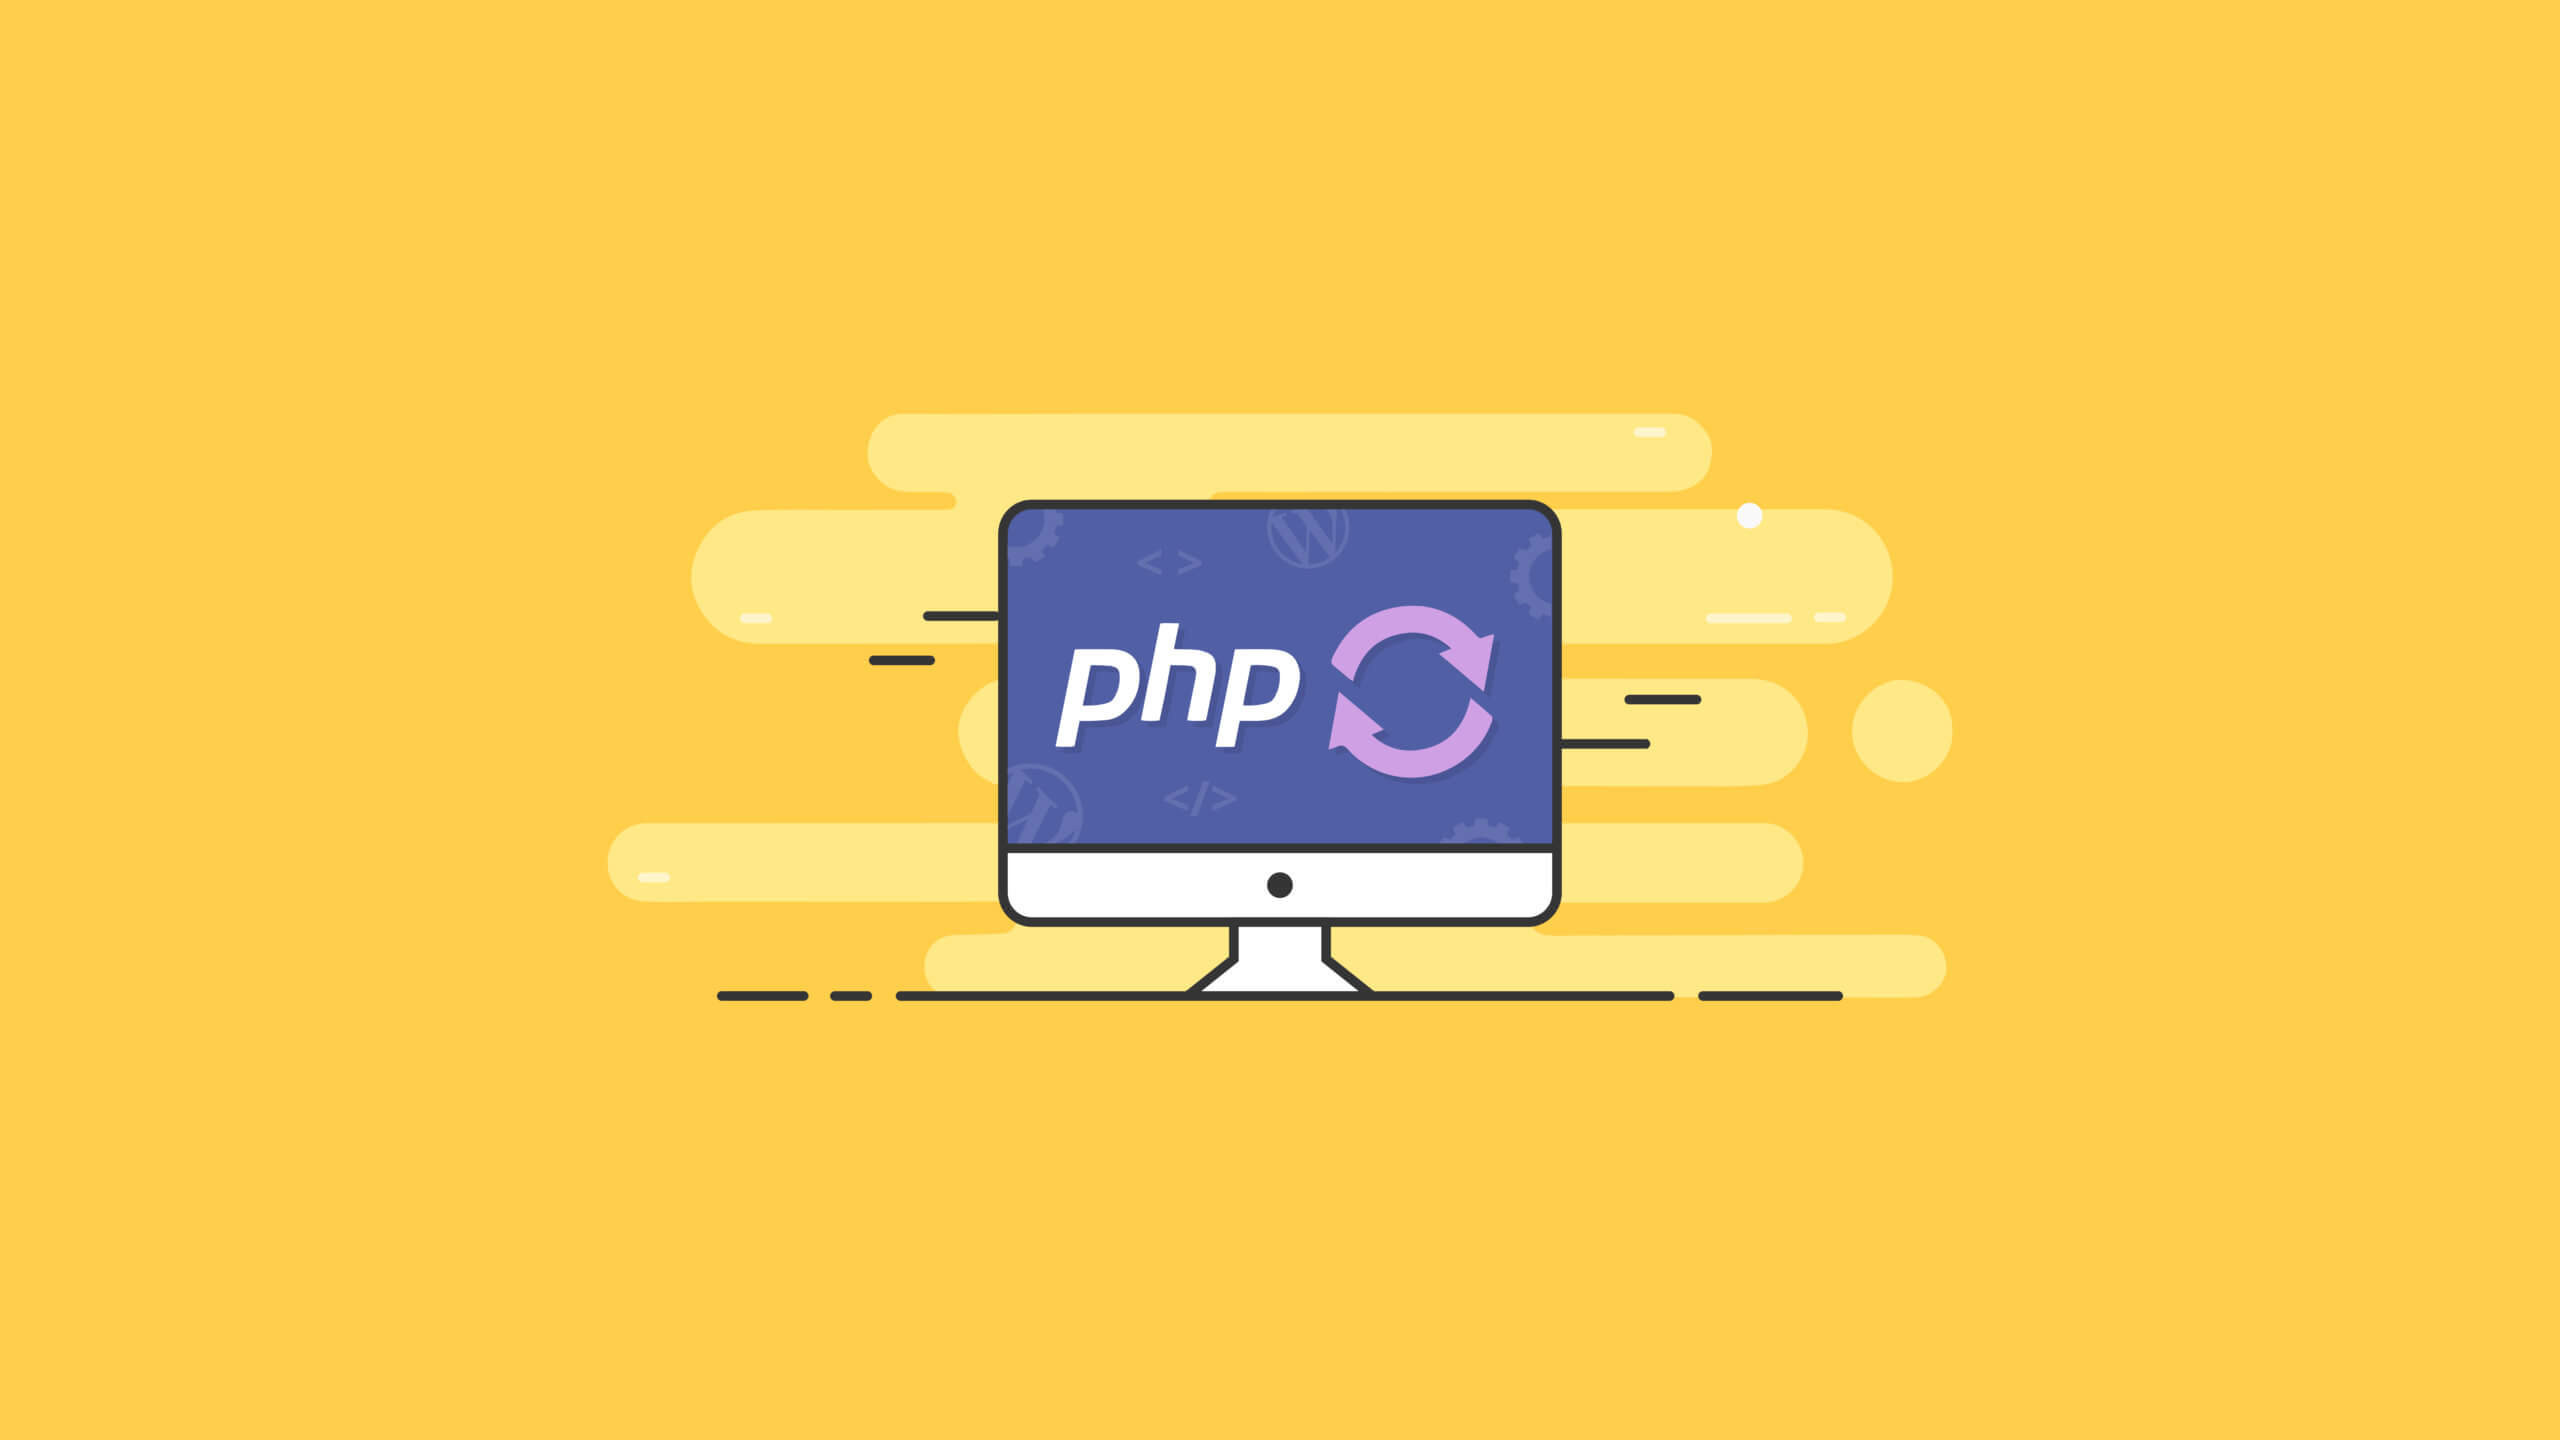 Can I change my website’s PHP configuration?